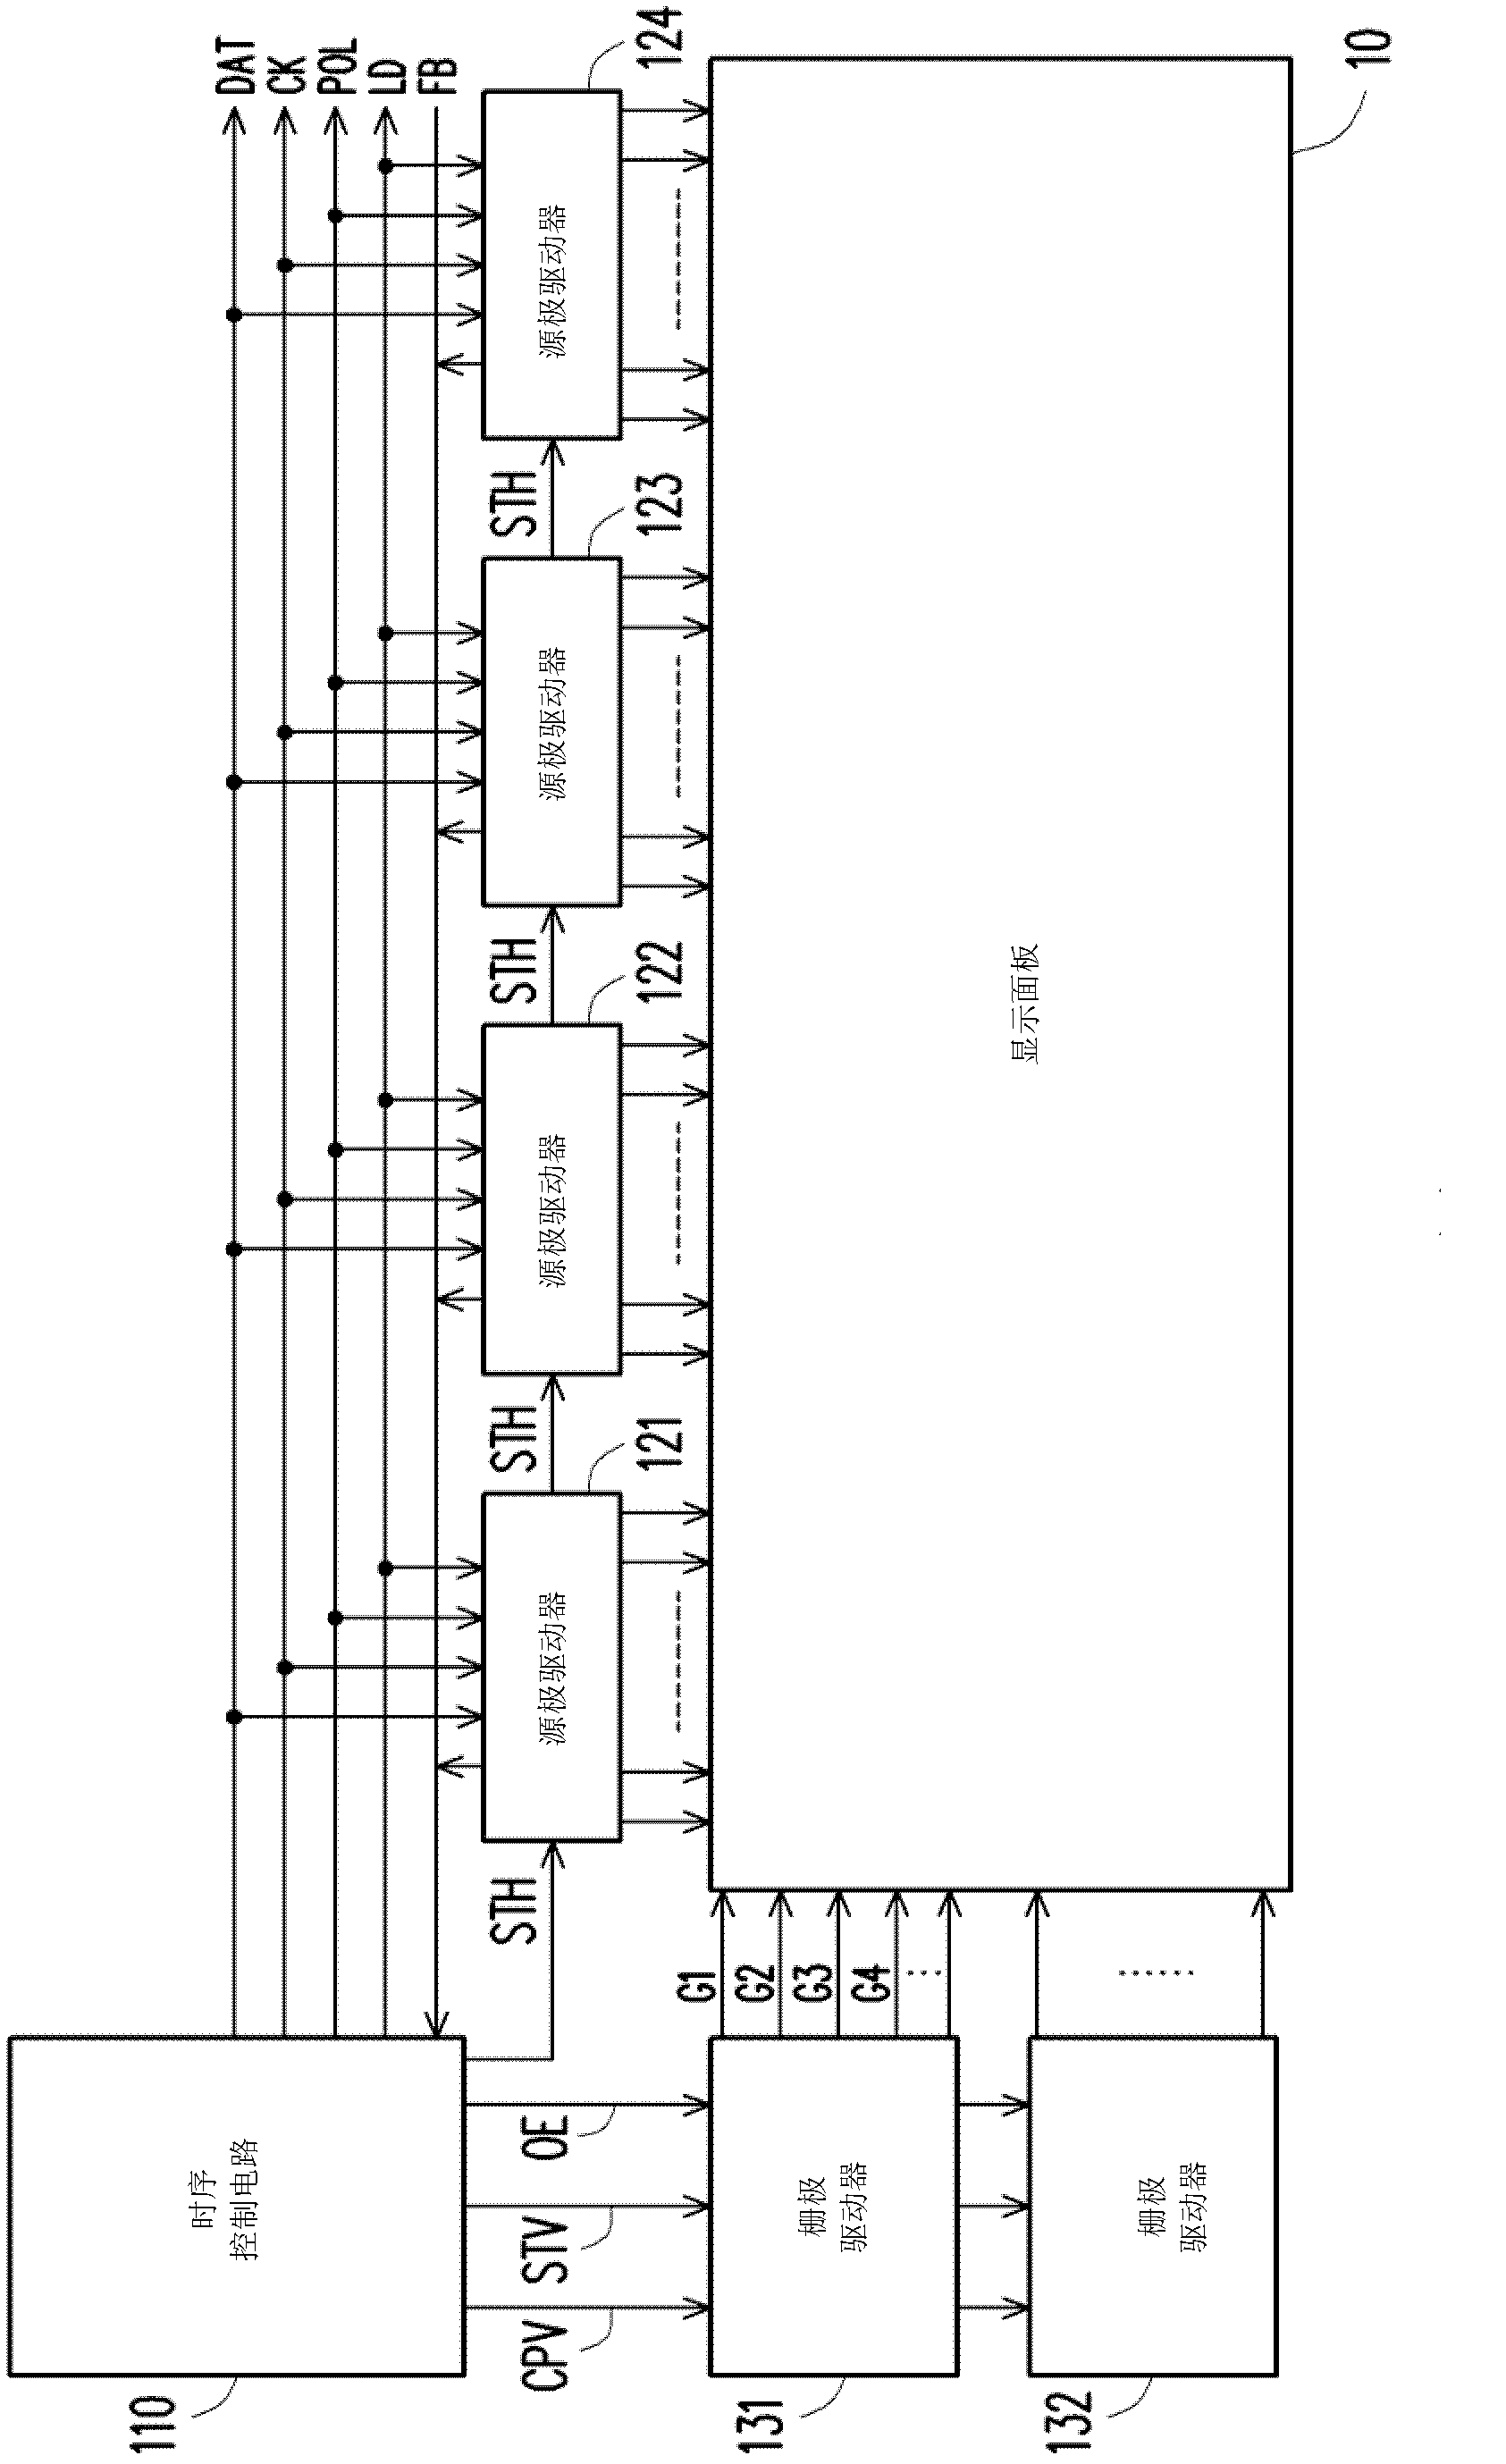 Display panel driving device, operation method thereof and source electrode driver of display panel driving device